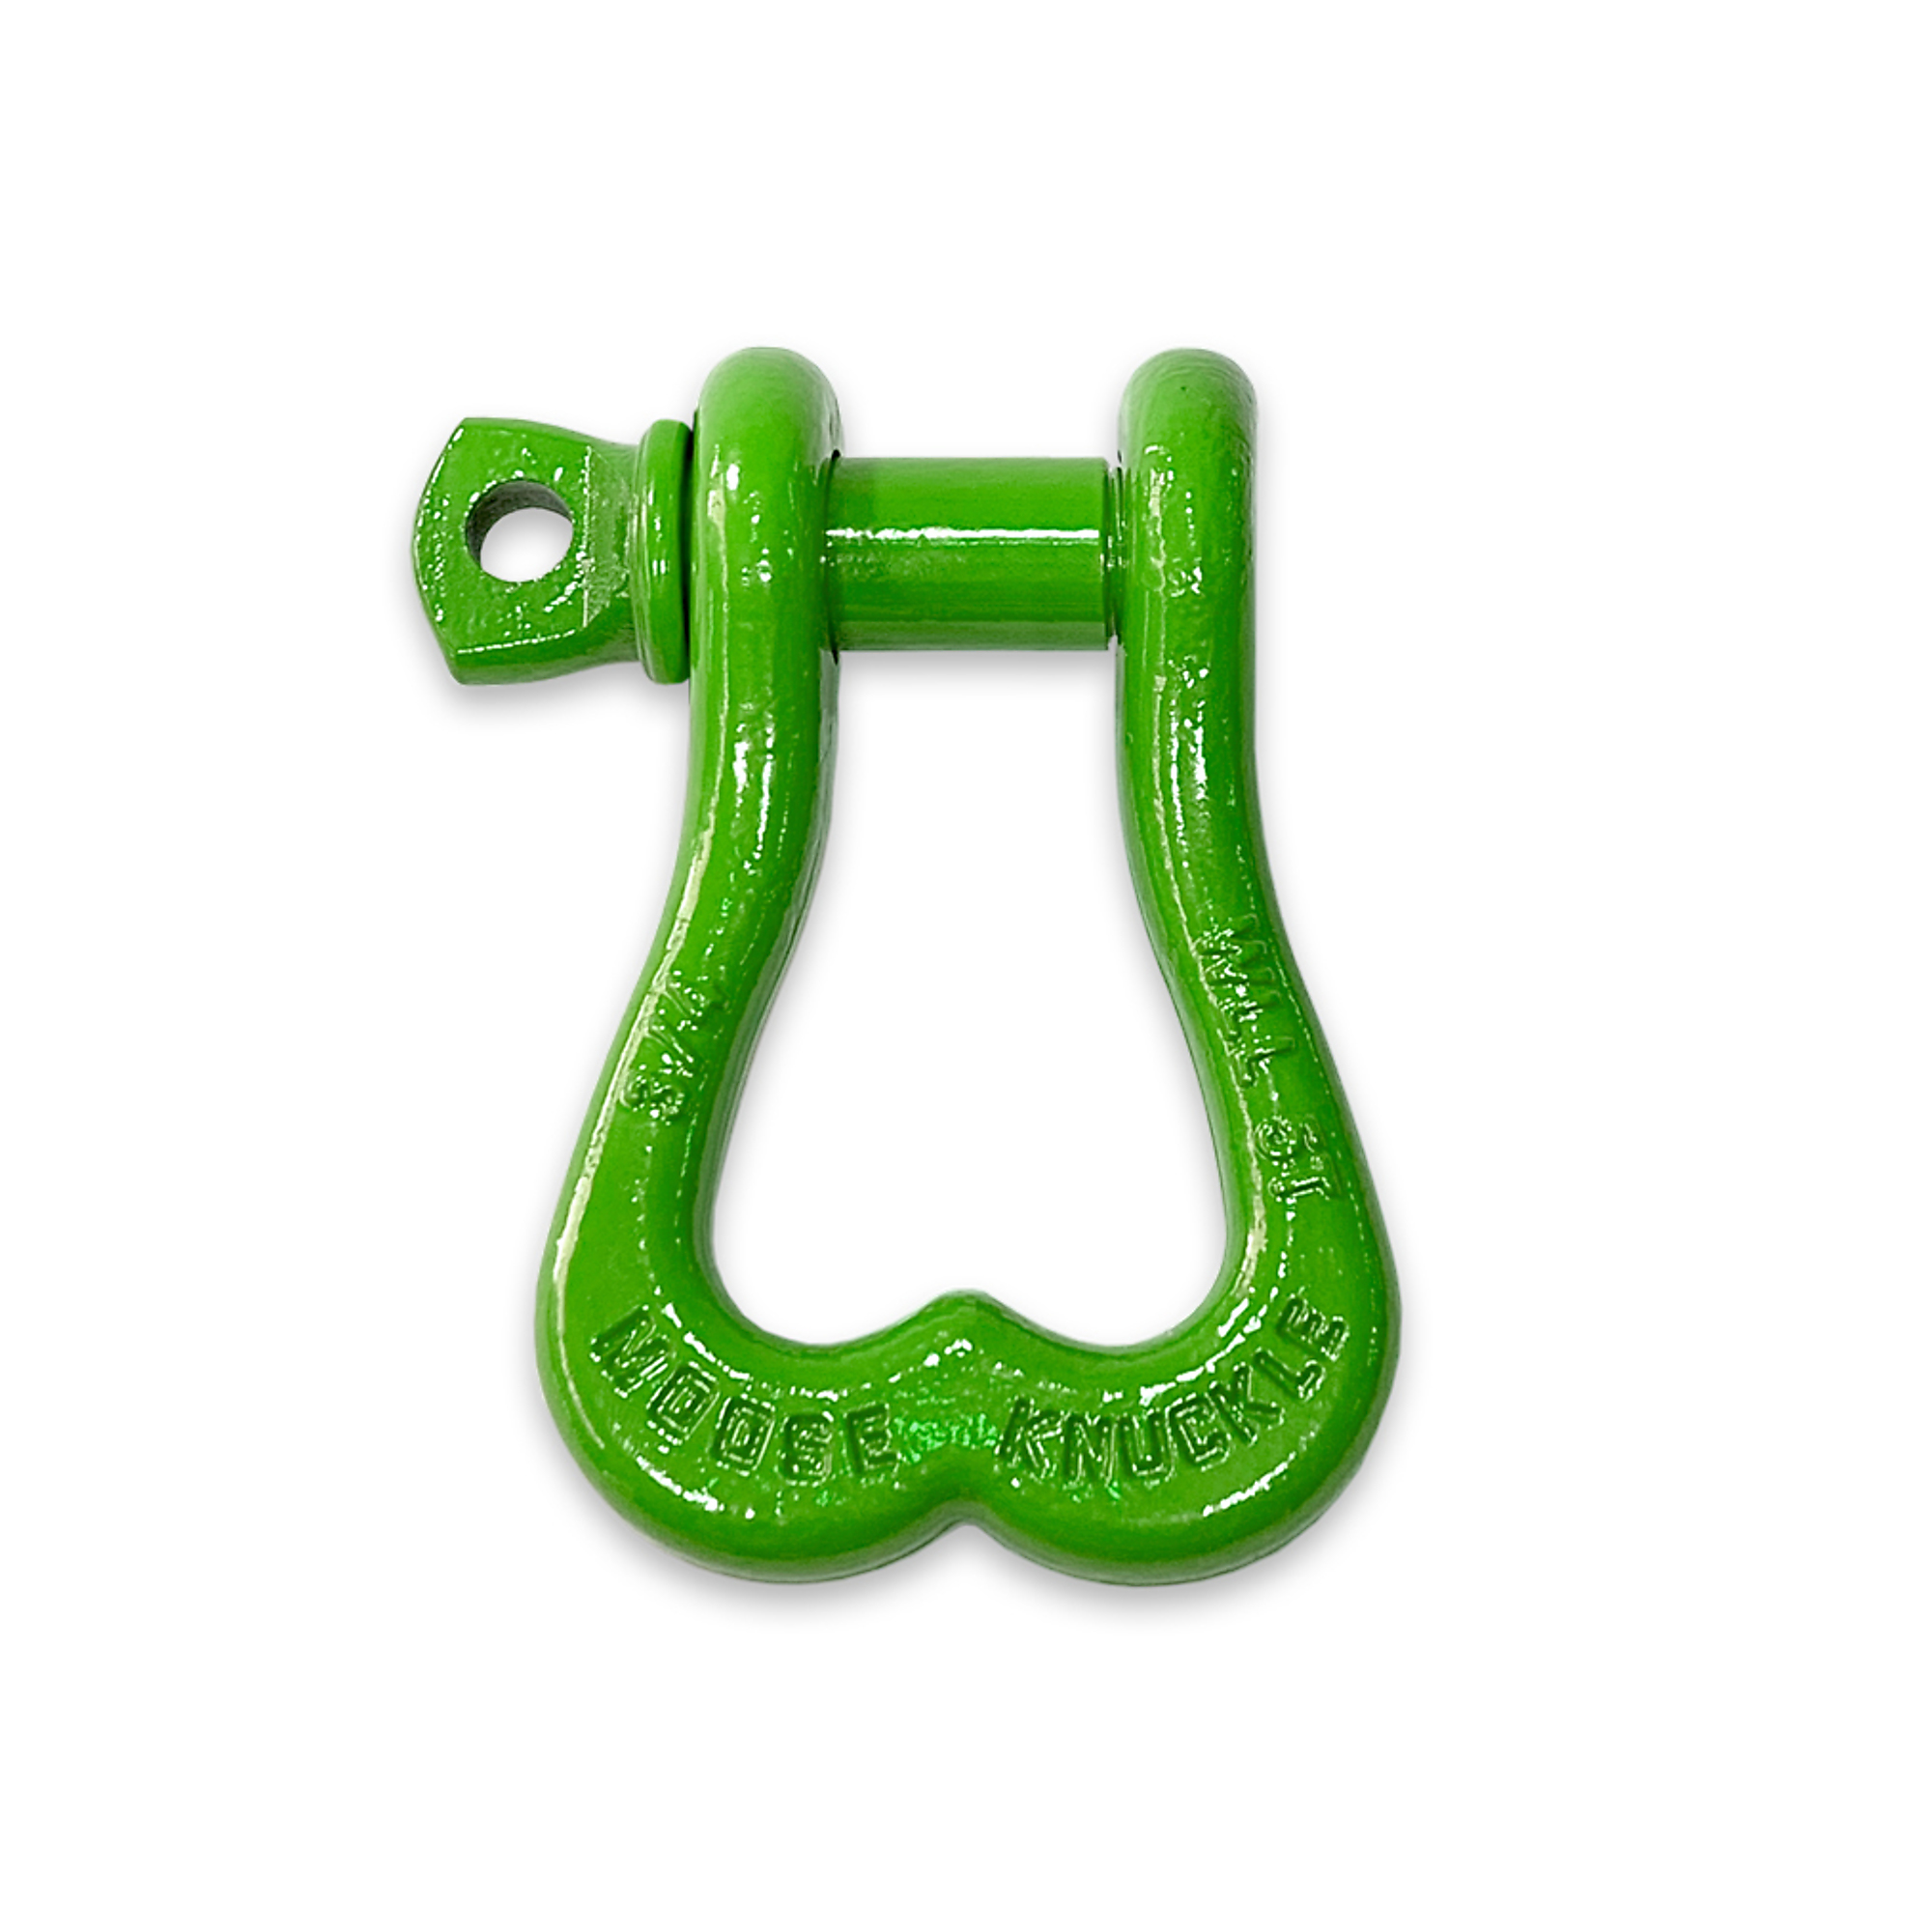 Moose Knuckle Offroad, Sublime Green 3/4Inch Recovery Towing Shackle, Working Load Limit 10000 lb, Model FN000001-006